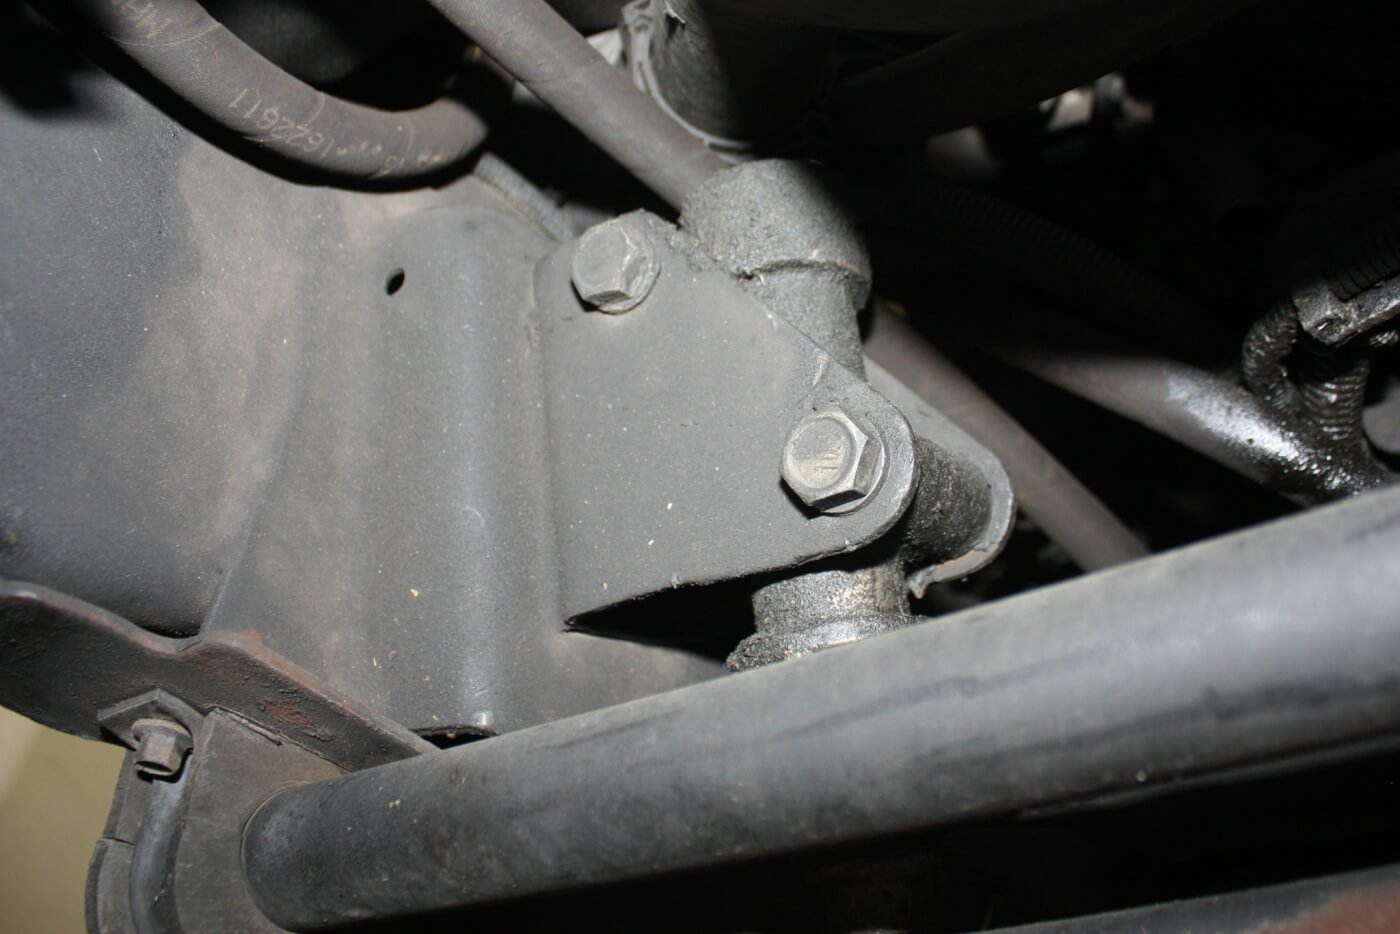 10. The idler arm is located on the inside of the passenger frame rail, attached to a small bracket with two large bolts. The idler arm creates a pivot point for the center link that attaches the steering box to the tie rod ends. Lifting the truck and adding large, heavy tires puts tremendous stress on the idler arm, and the stock piece is prone to failure under such circumstances.